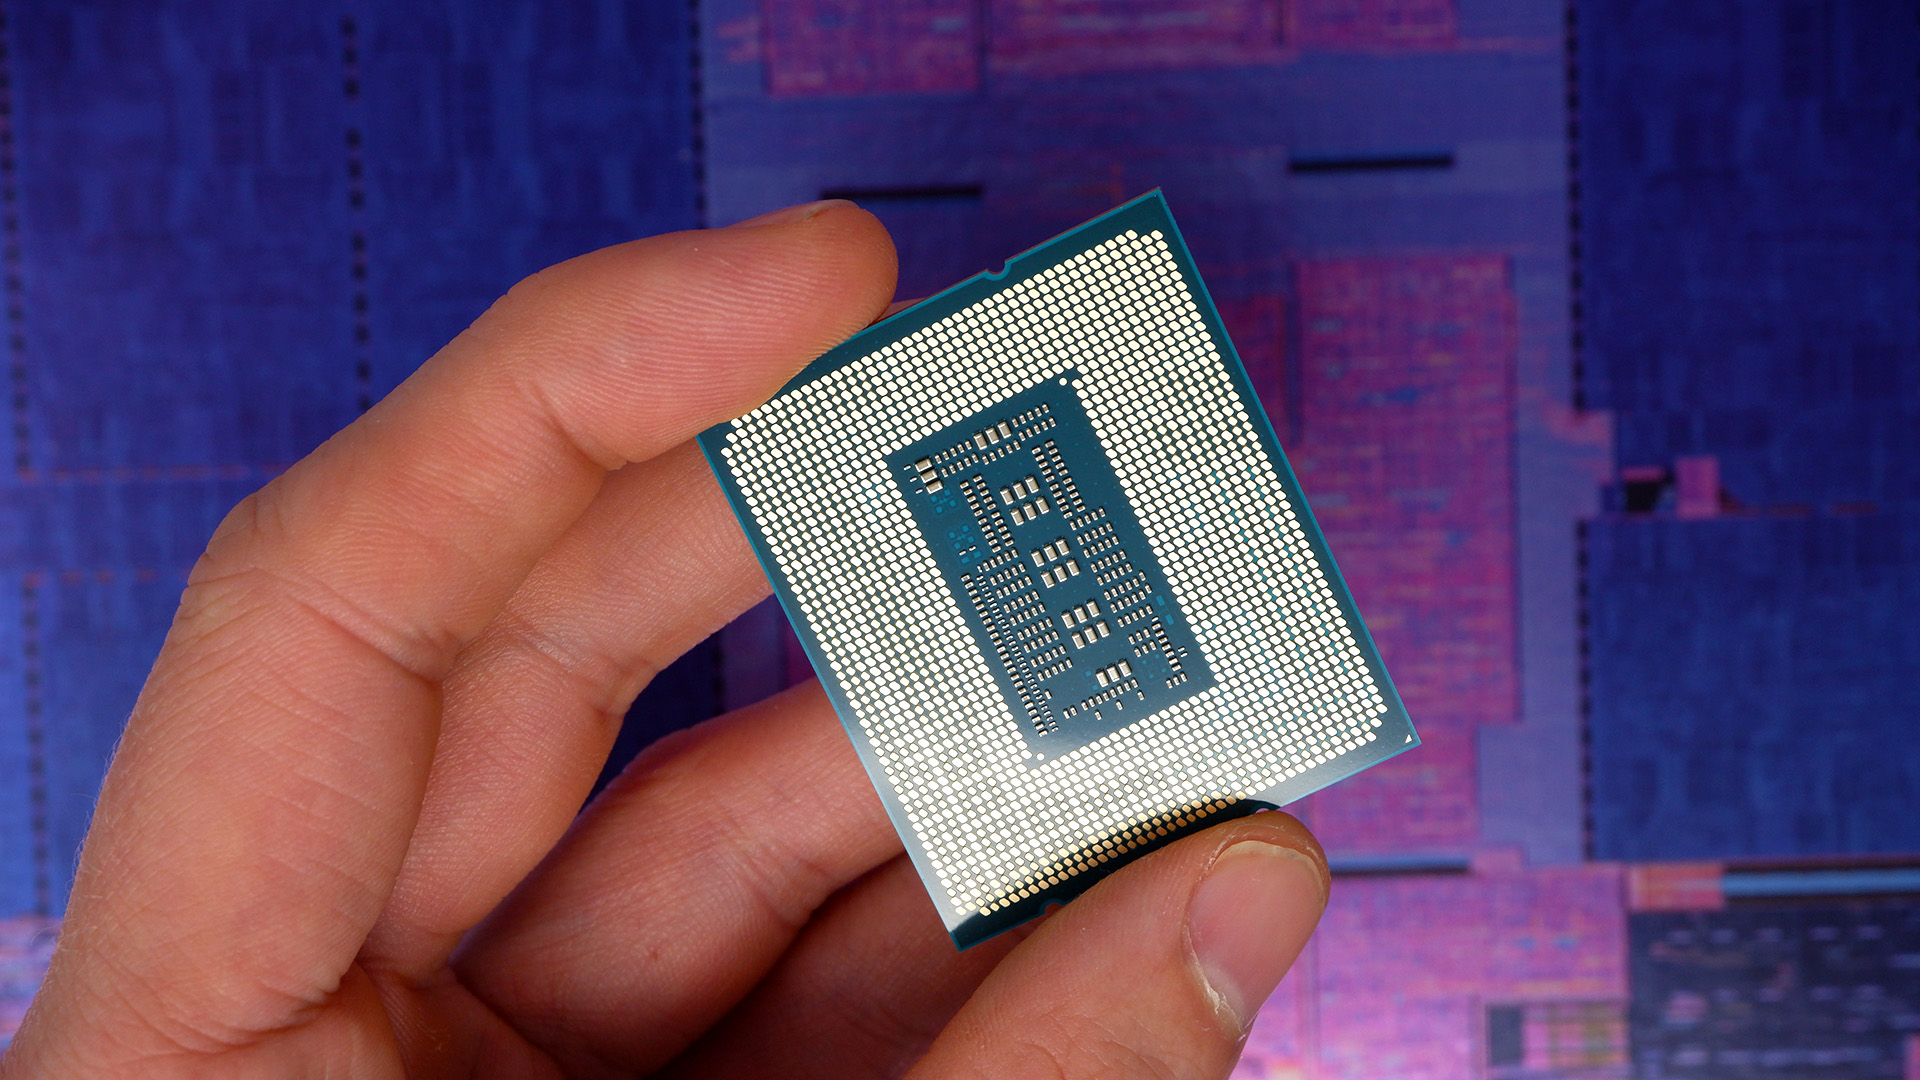  Intel finally breaks silence, points finger at 'microcode algorithm' voltage errors, and says it's going to patch Core 13th/14th Gen CPU stability issues mid-August 